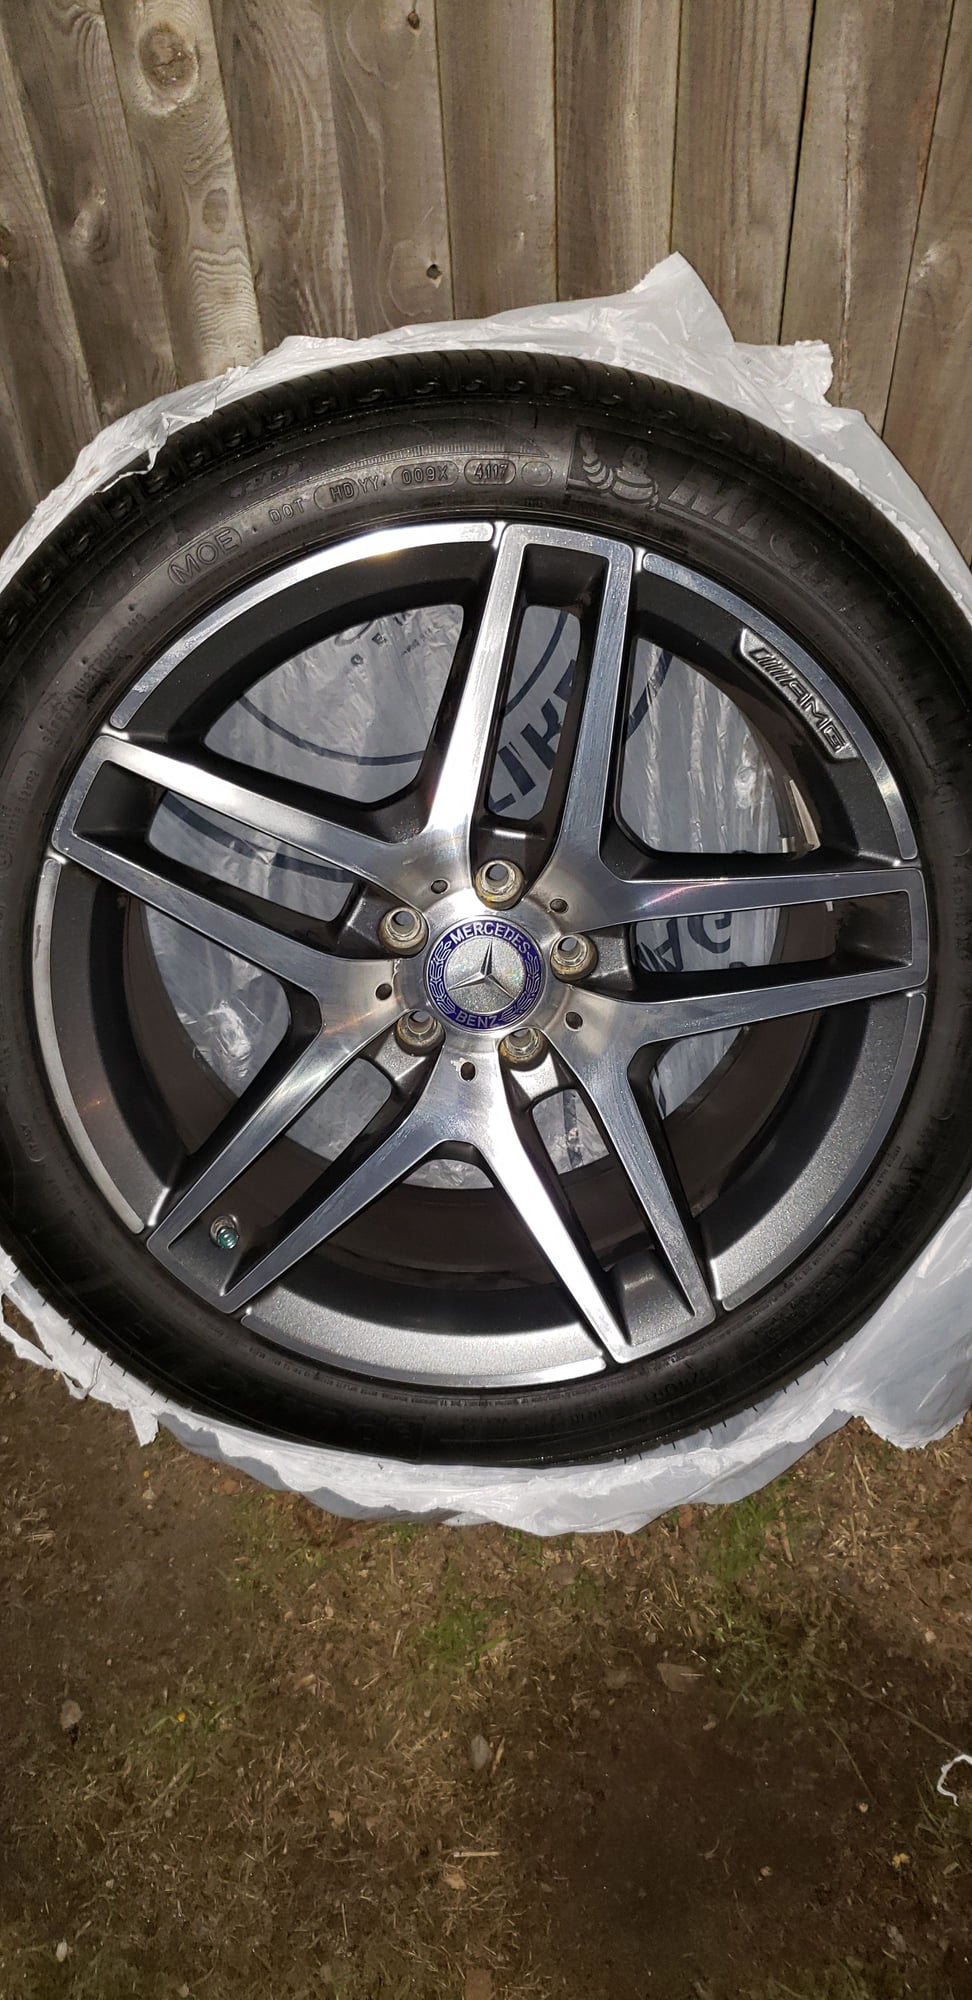 Wheels and Tires/Axles - 2015 S550 CPO Take Off 19" AMG Sport Wheels, Like New! - Used - 2014 to 2019 Mercedes-Benz S550 - West Warwick, RI 02893, United States